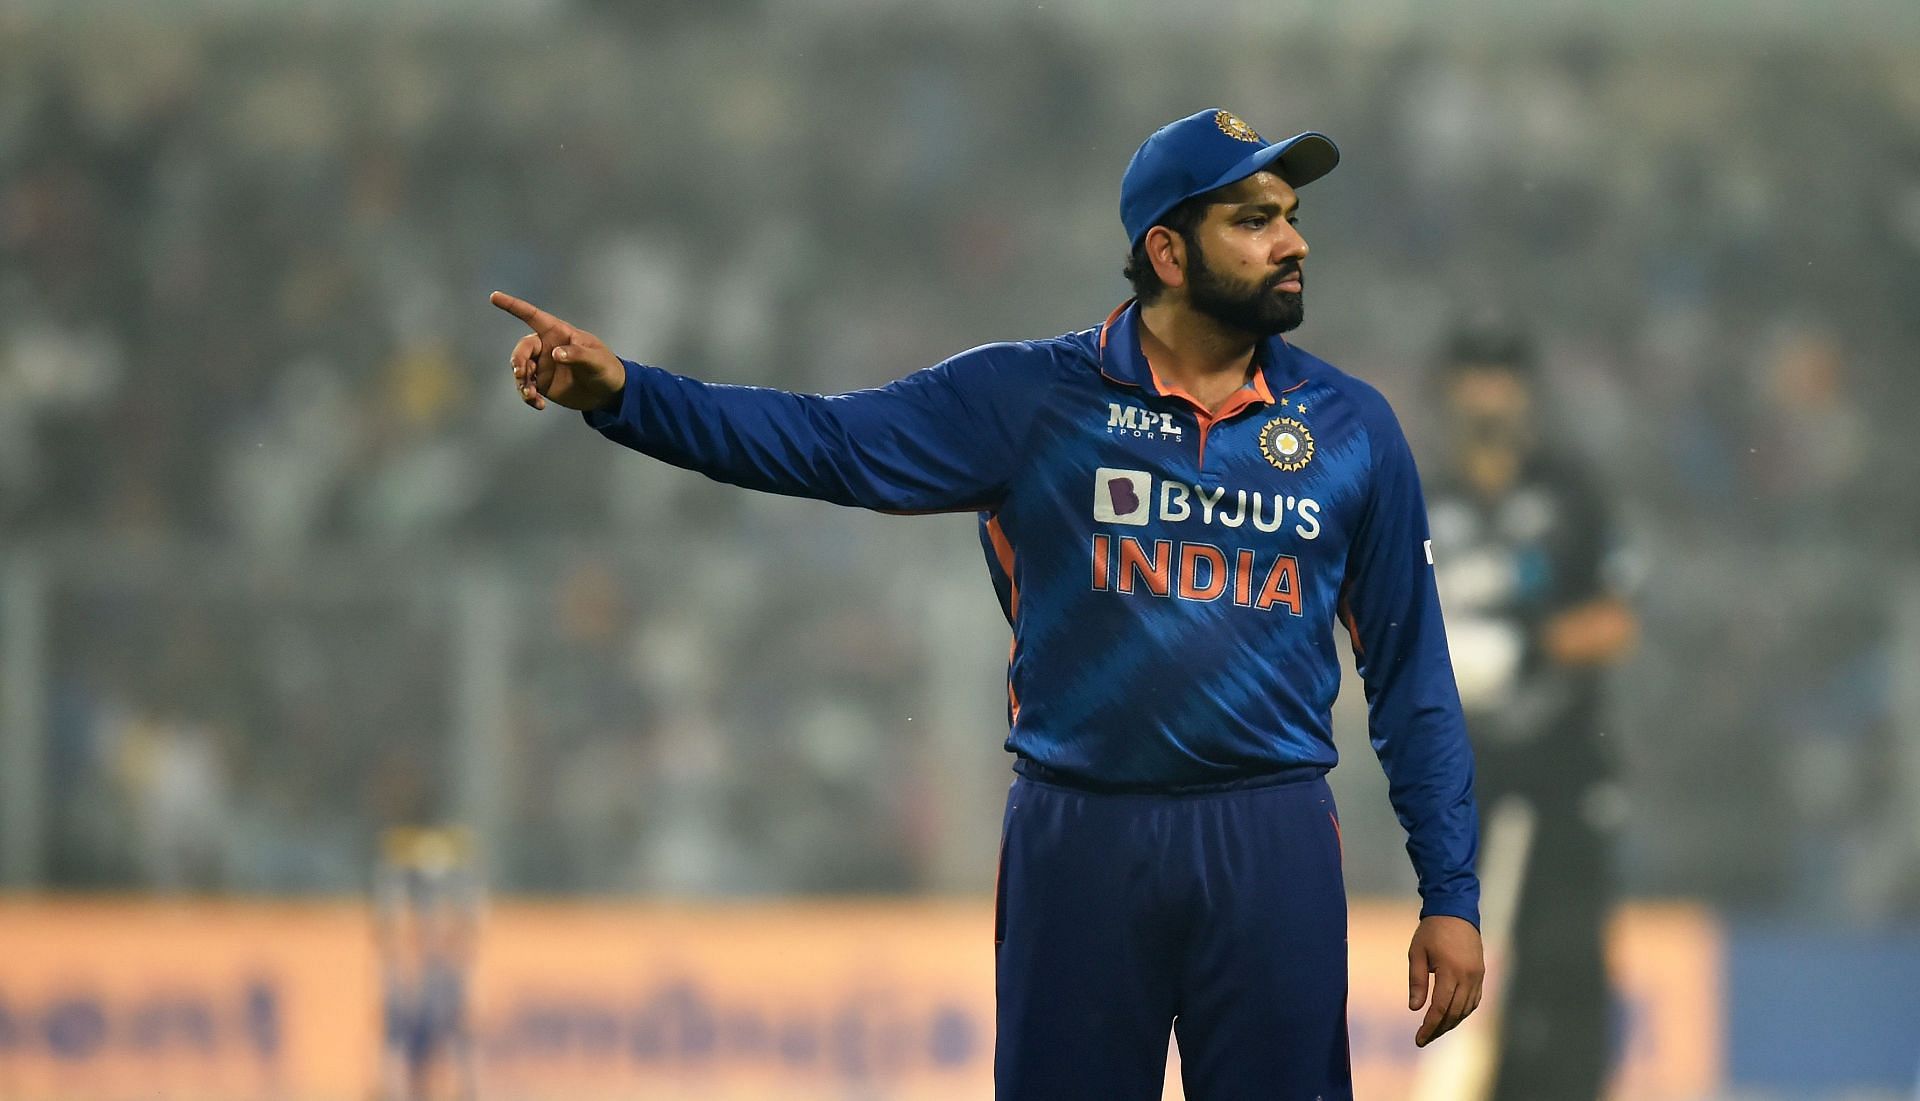 Rohit Sharma is supposed to captain Team India in the T20 World Cup later this year